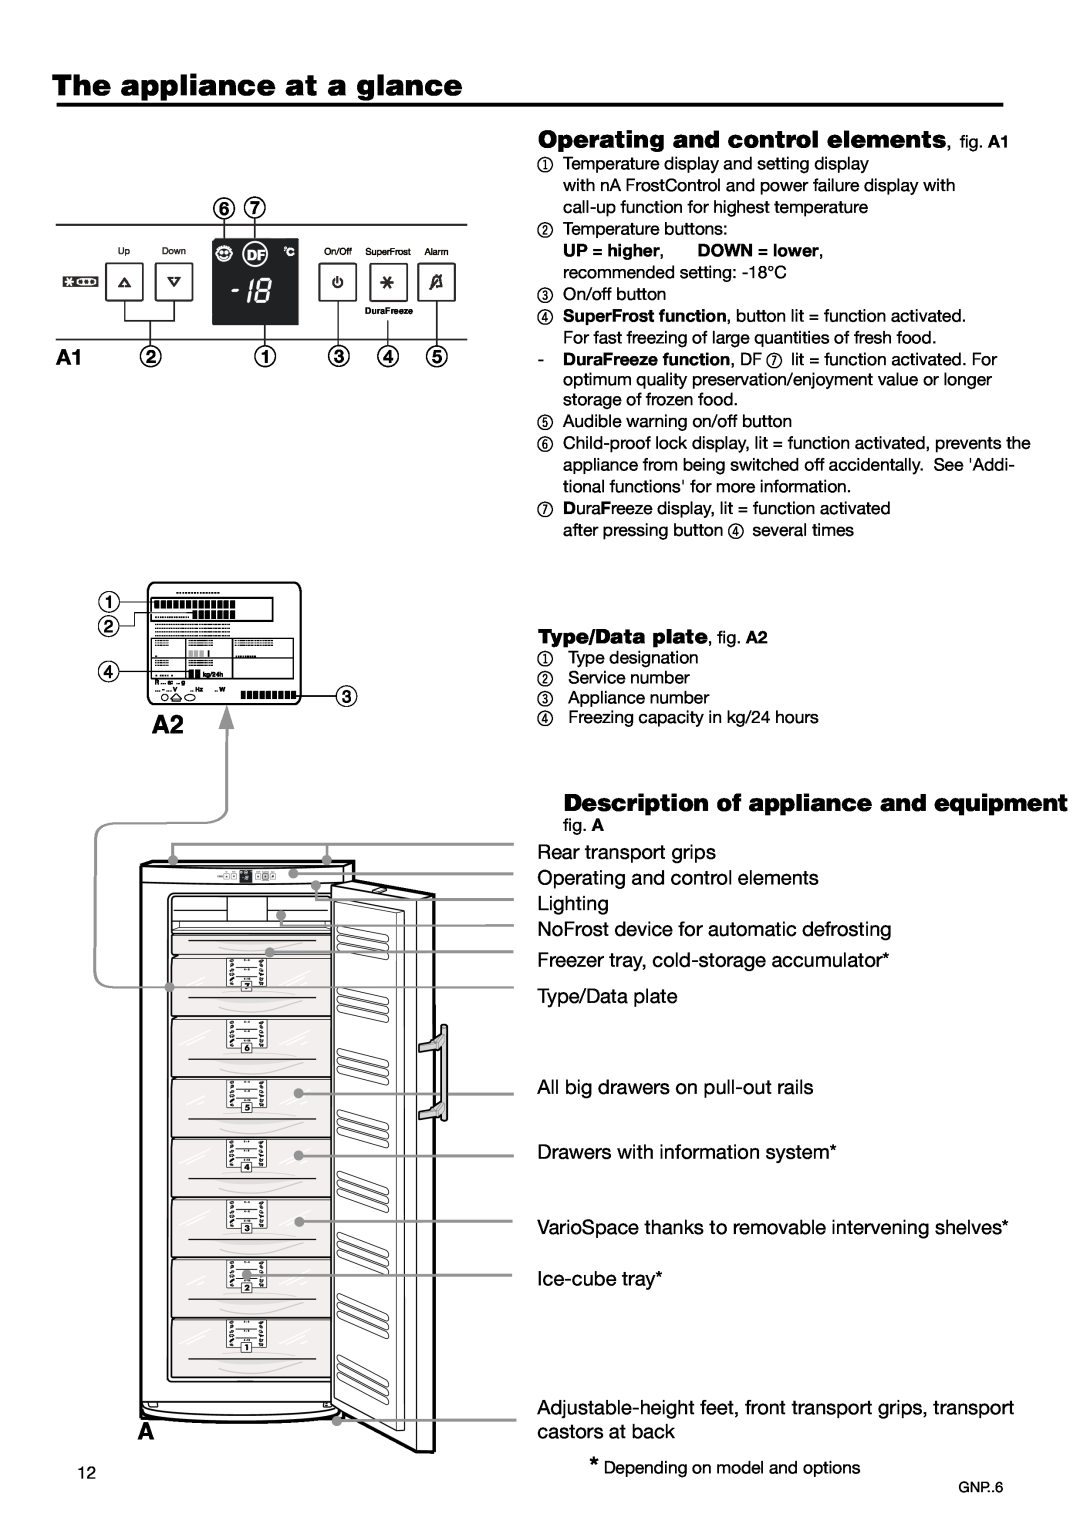 Liebherr 7082 260-00 manual The appliance at a glance, Operating and control elements, ﬁg. A1, Type/Data plate, ﬁg. A2 